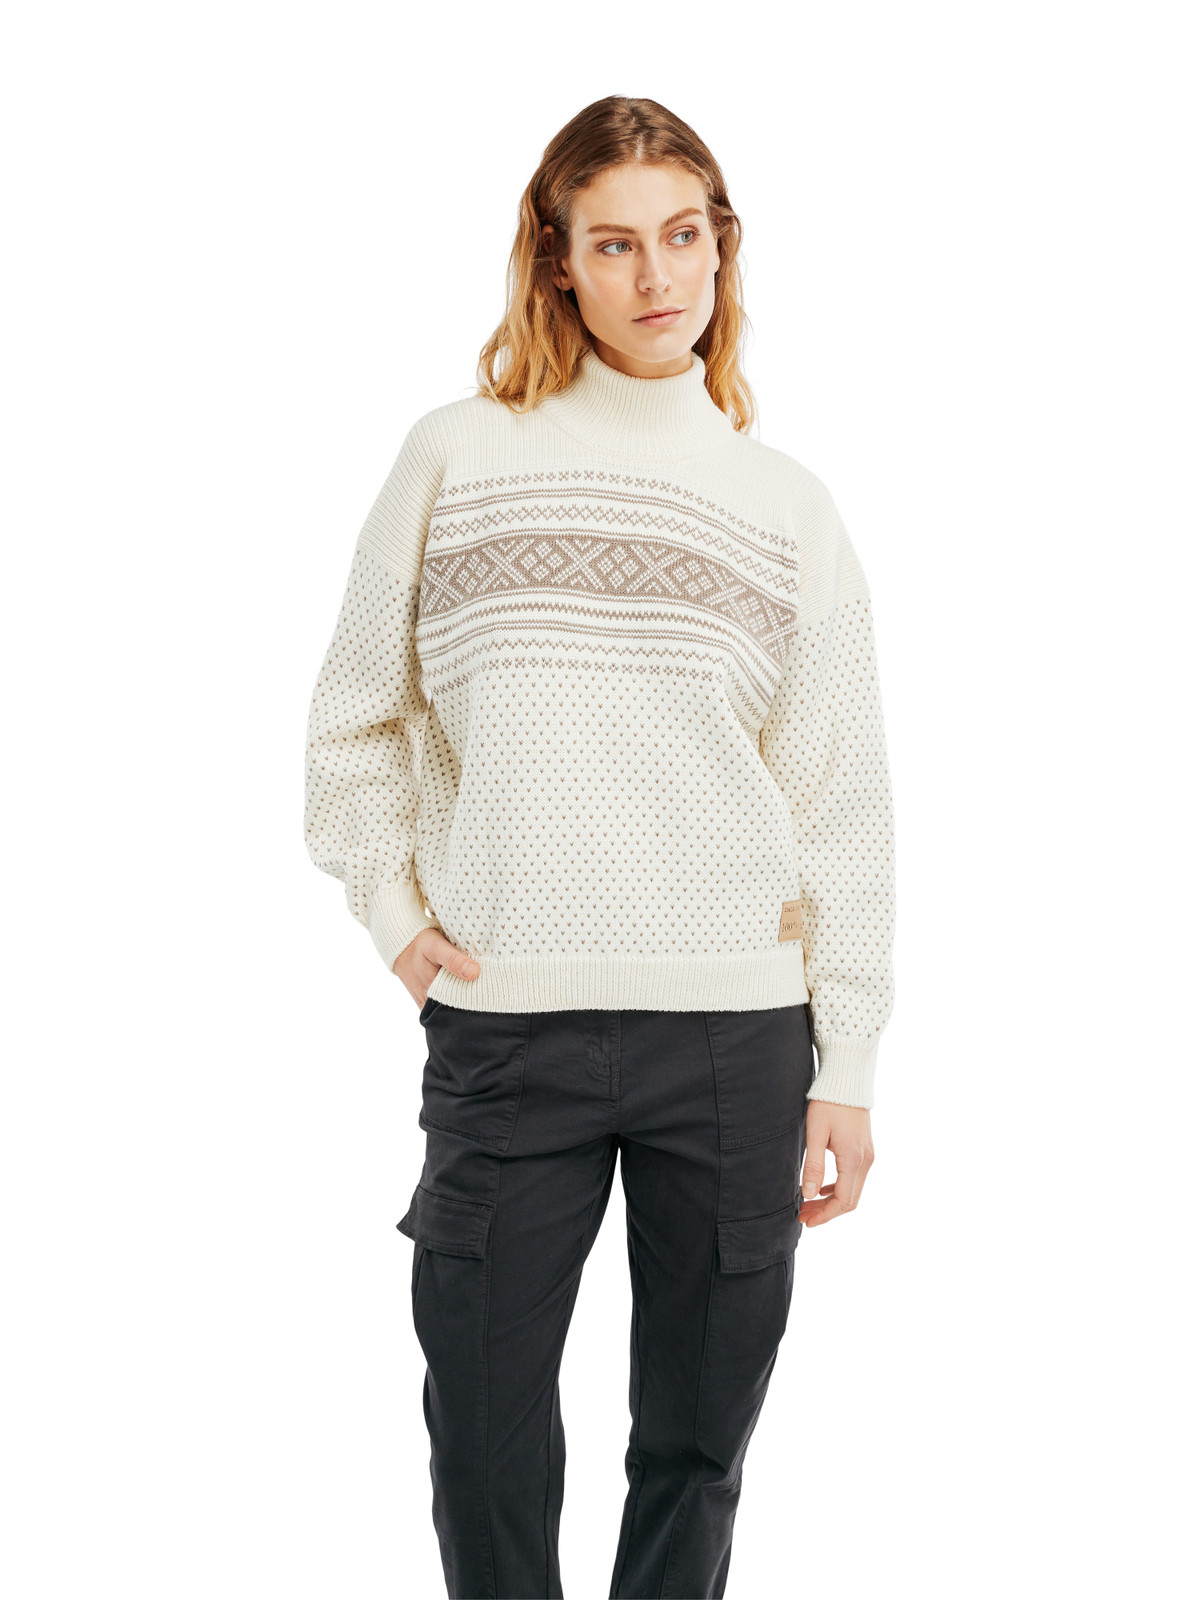 Dale of Norway Valloy Women's Sweater, Off White/Mountainstone, 95261-A01